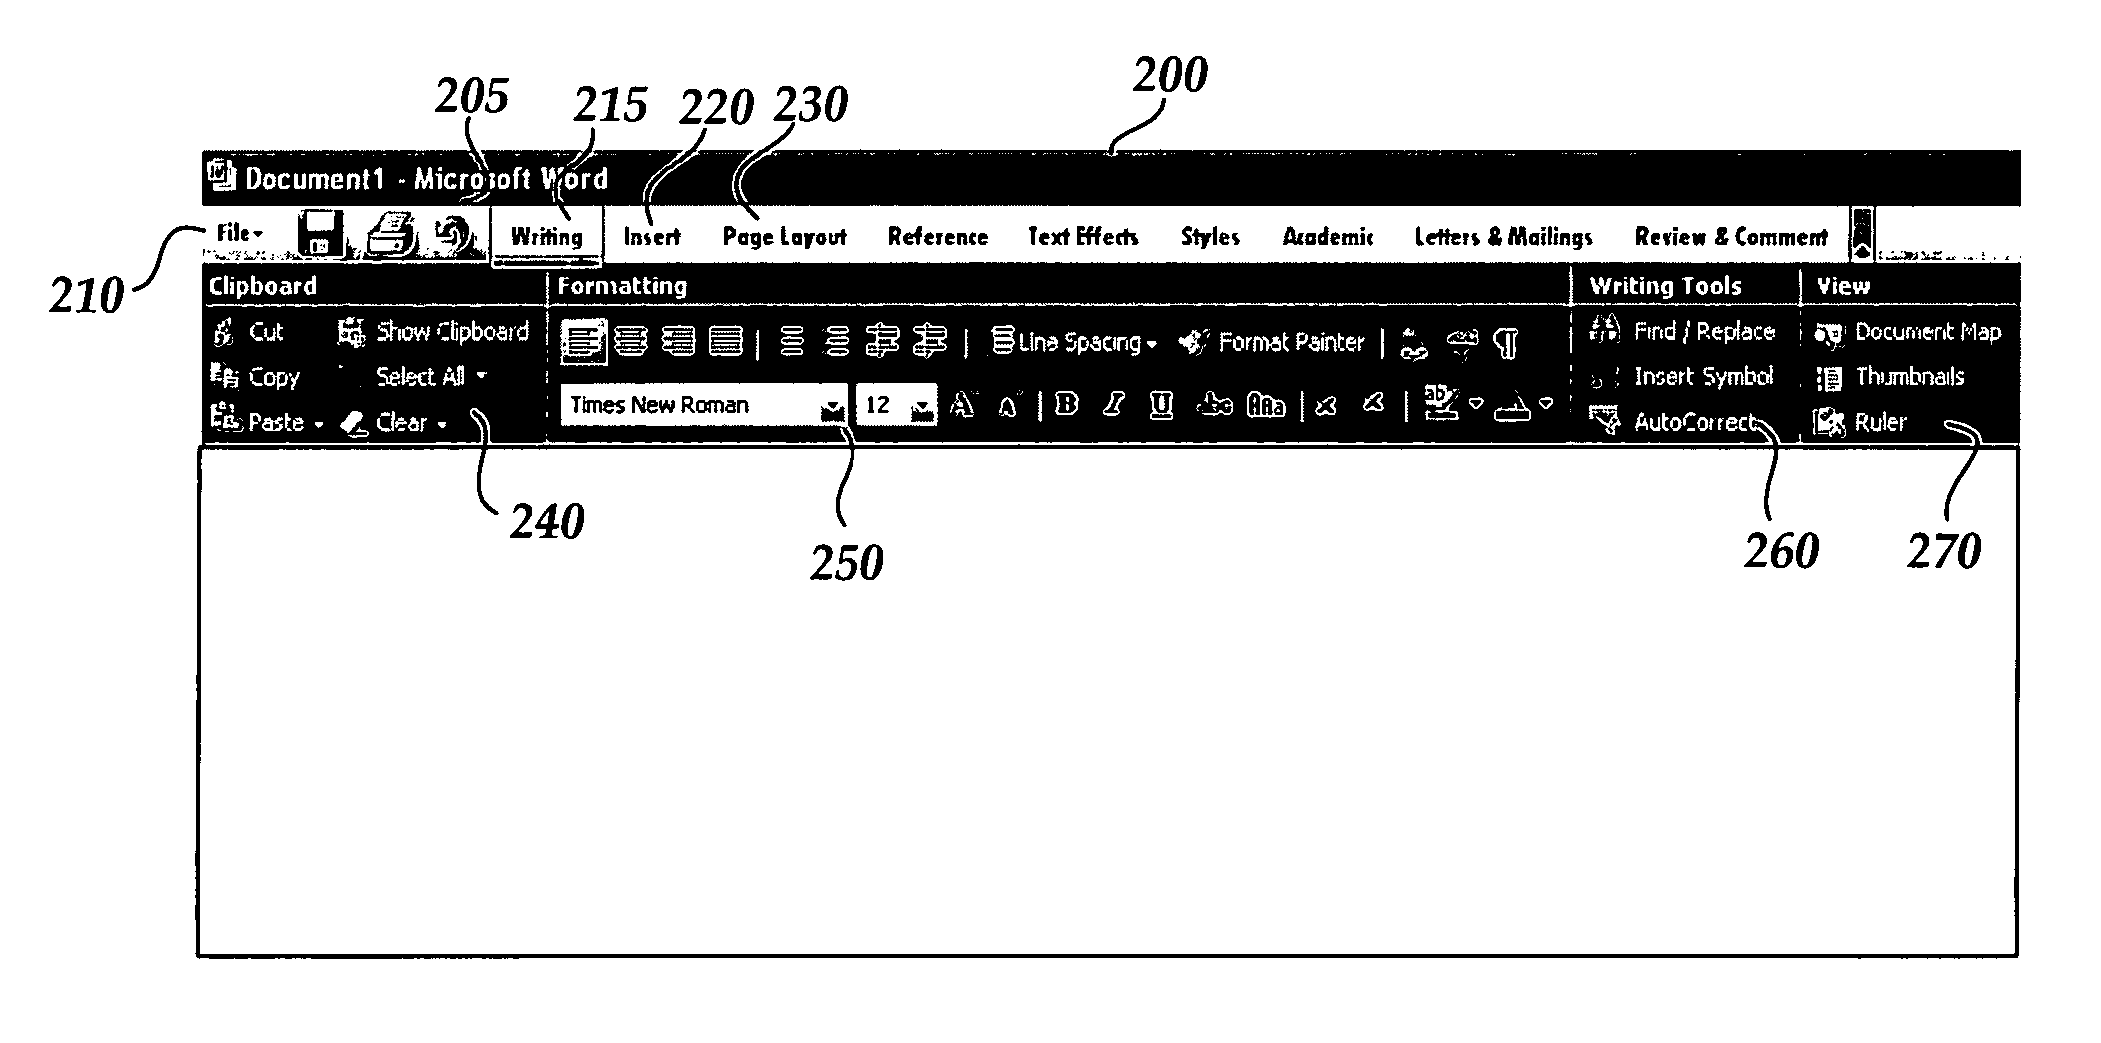 Command user interface for displaying selectable software functionality controls